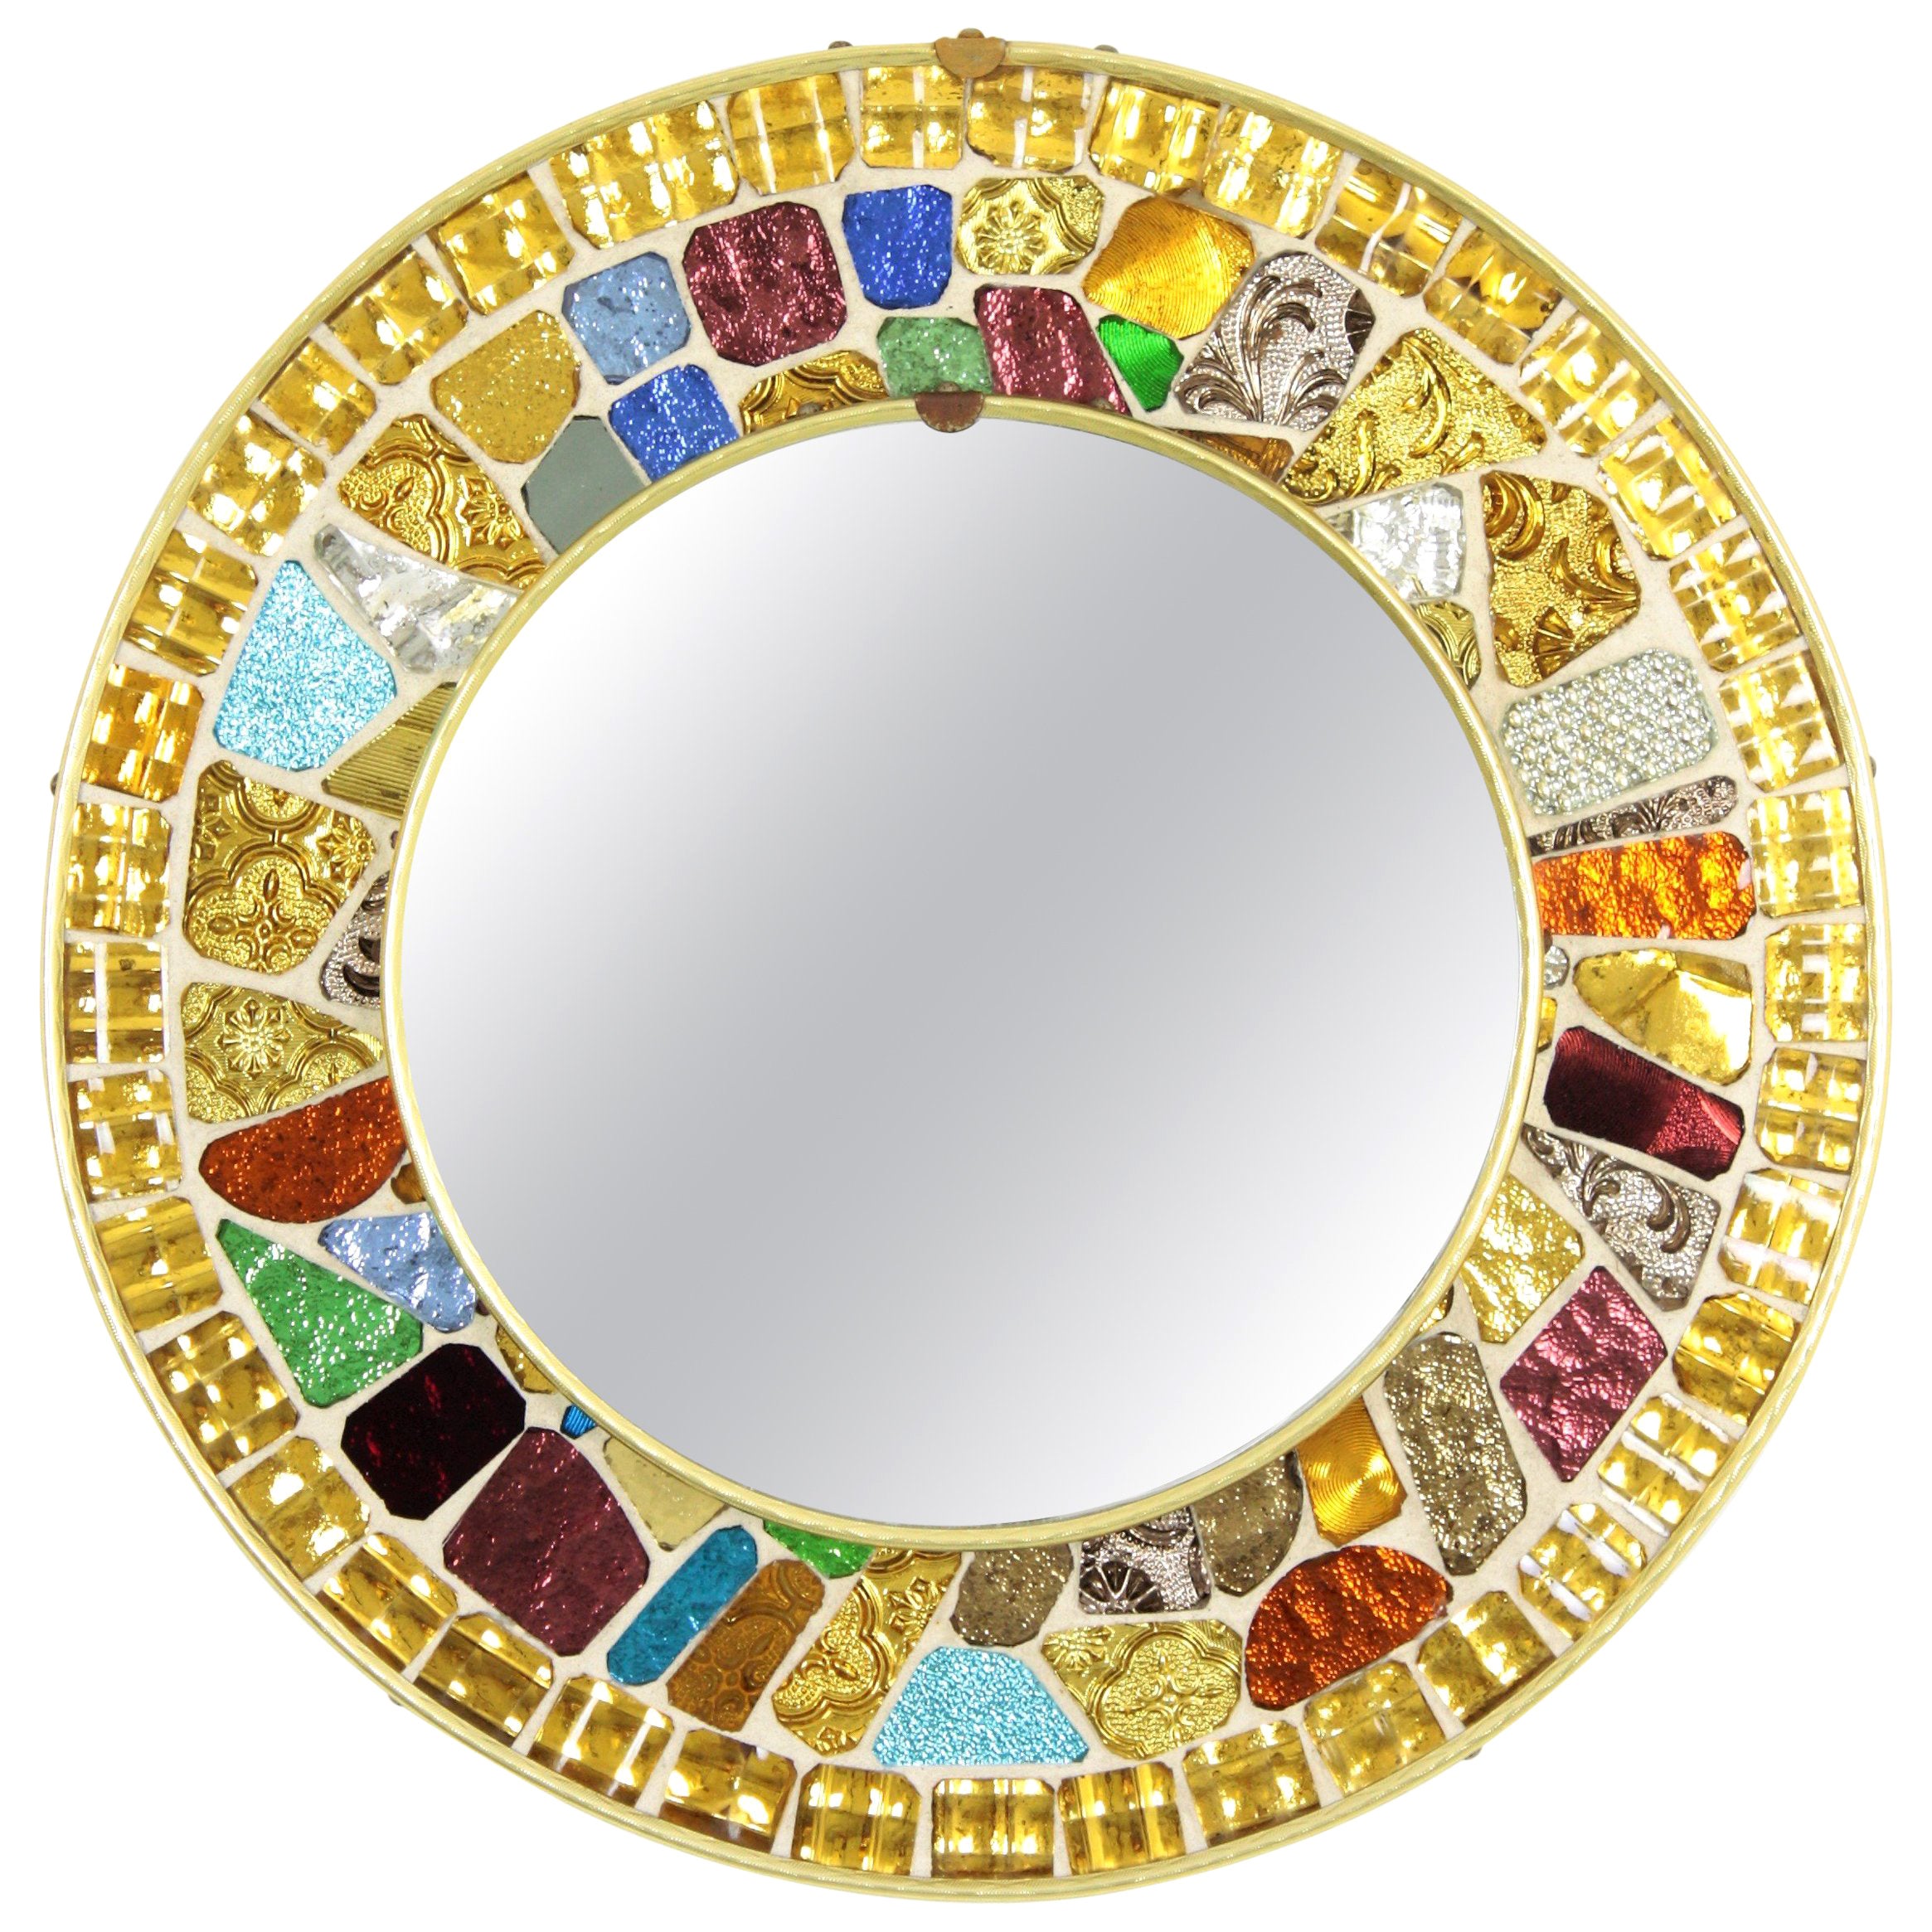 Midcentury Round Mirror with Muti Color Glass Mosaic Frame, 1960s For Sale